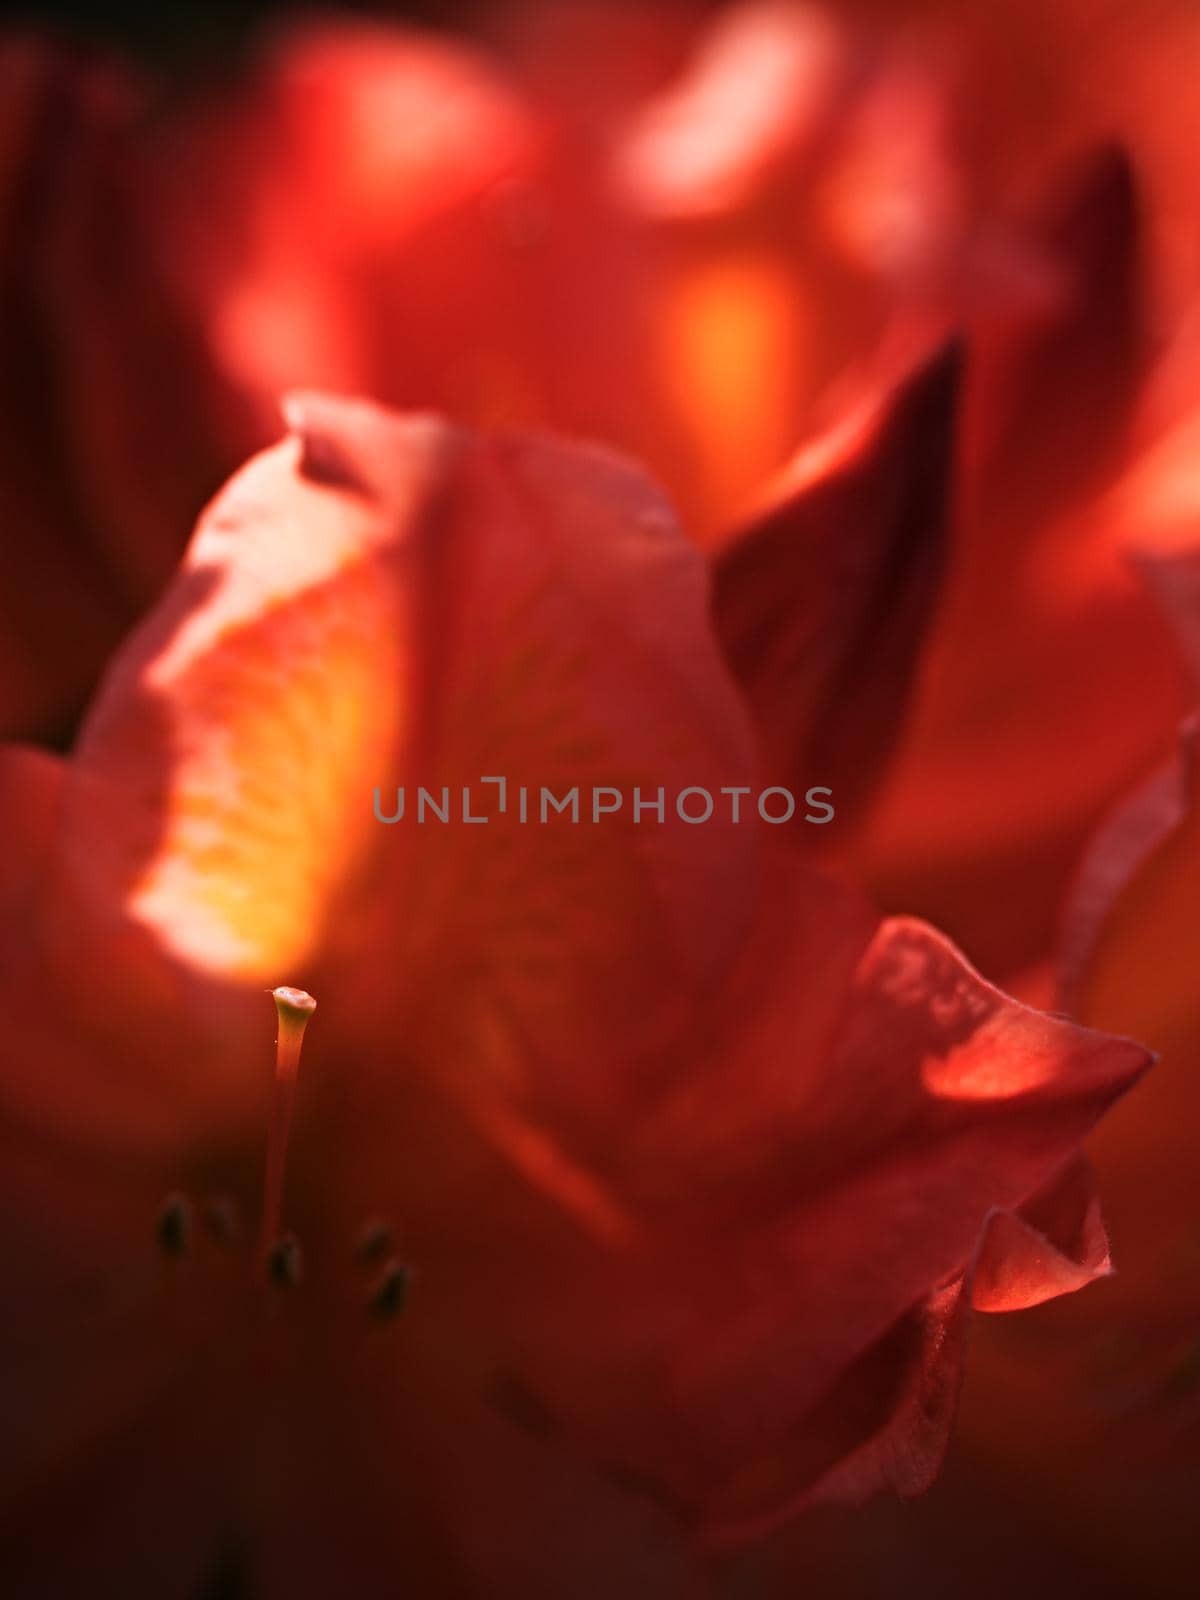 Vireya Rhododendron in amazing blossom. Flaming bright flower blooming  by rdonar2